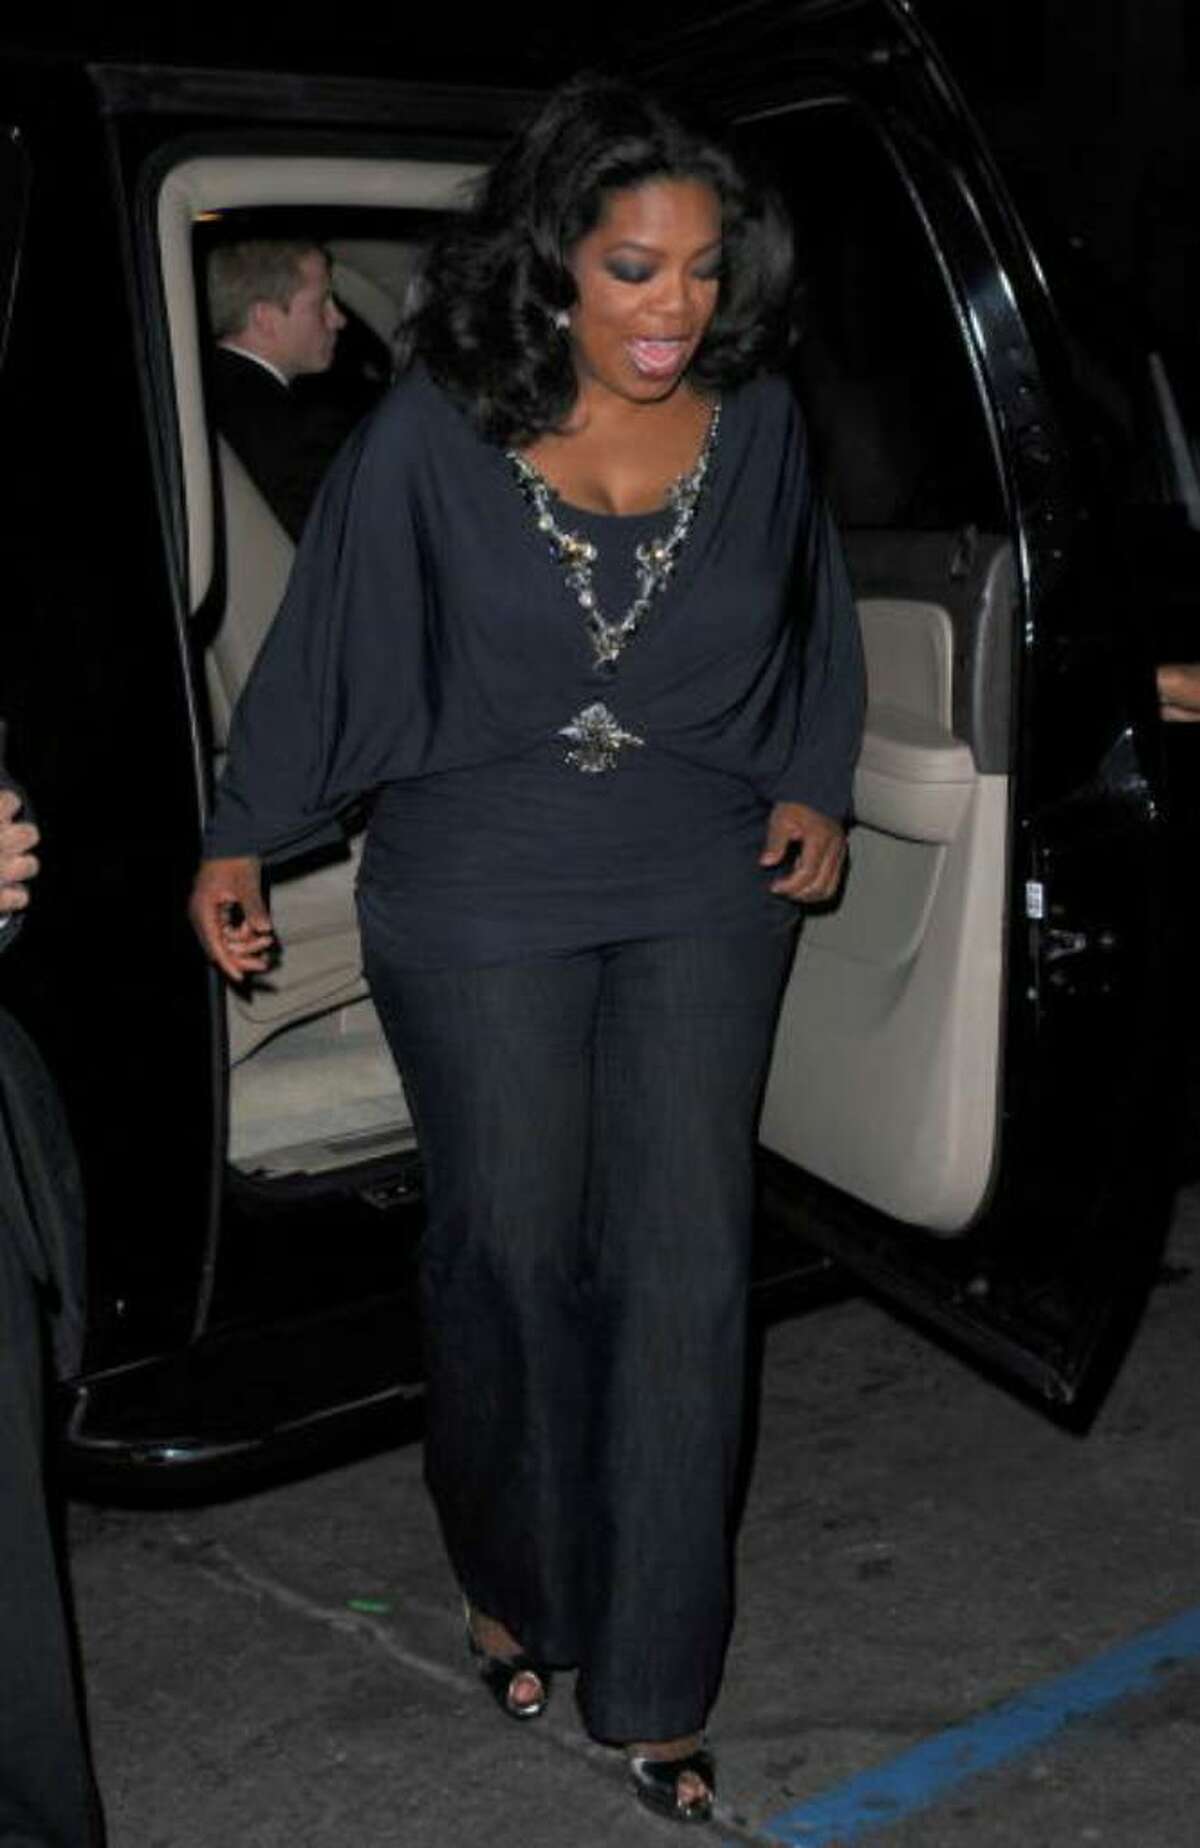 HOLLYWOOD - NOVEMBER 01: Oprah Winfrey arrives at the AFI FEST 2009 Screening Of Precious: Based On The Novel 'PUSH' By Sapphire on November 1, 2009 in Hollywood, California. (Photo by Jason Merritt/Getty Images)